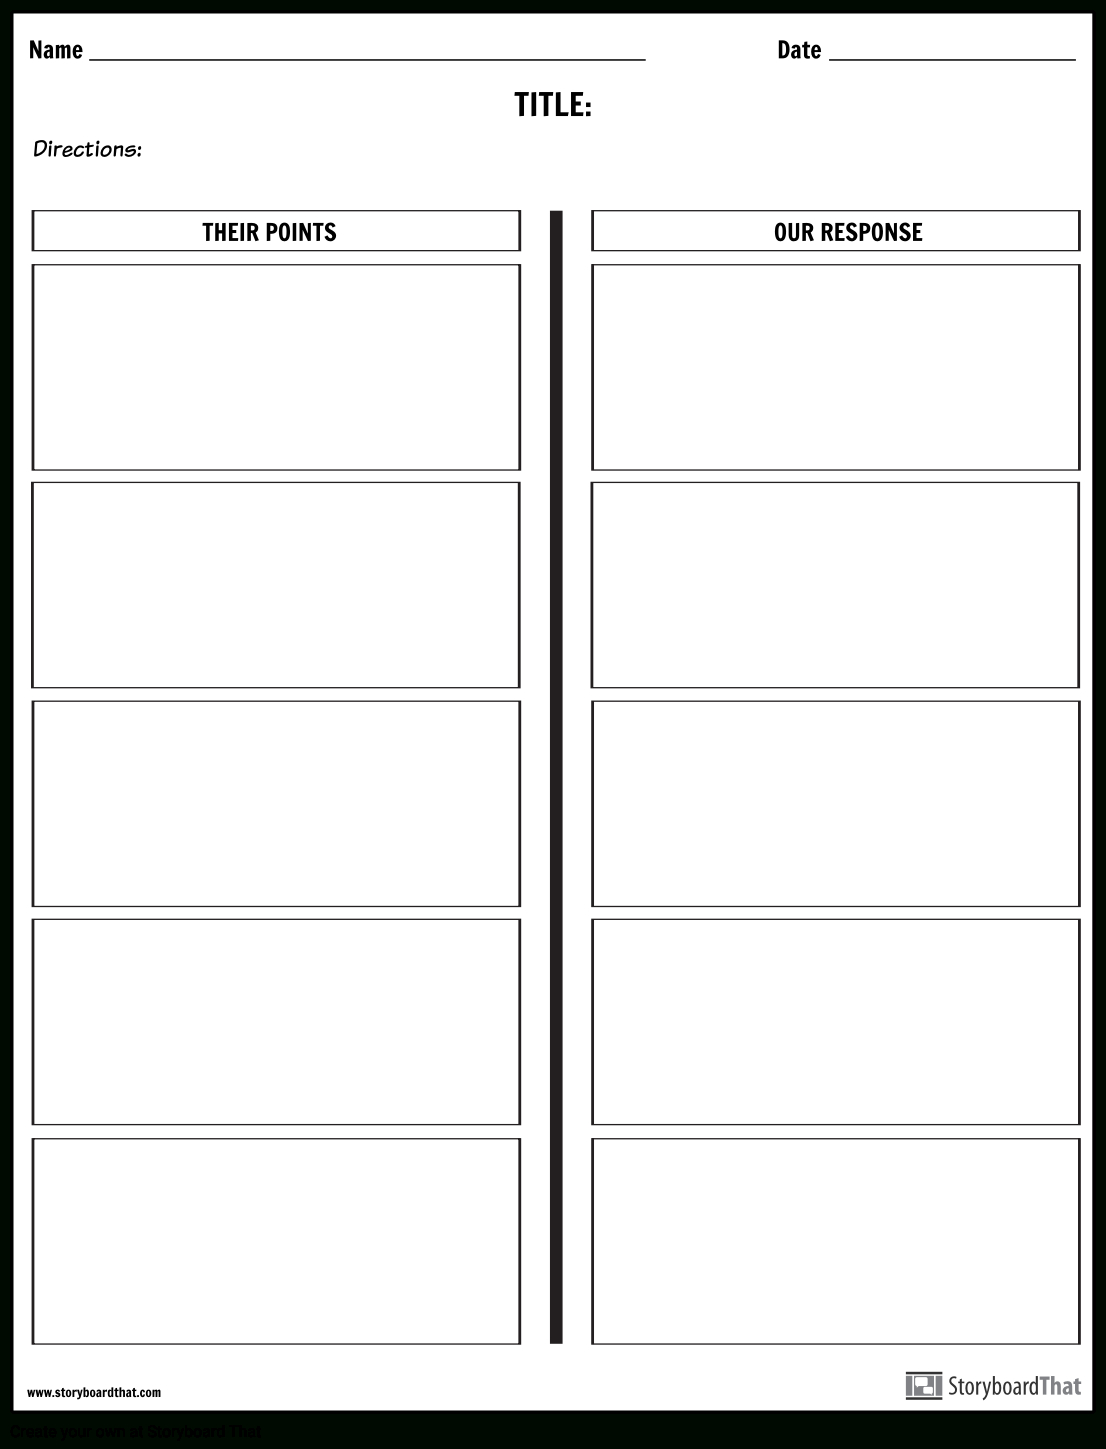 6B0 Debate Cue Cards Template | Wiring Resources Throughout Cue Card Template Word